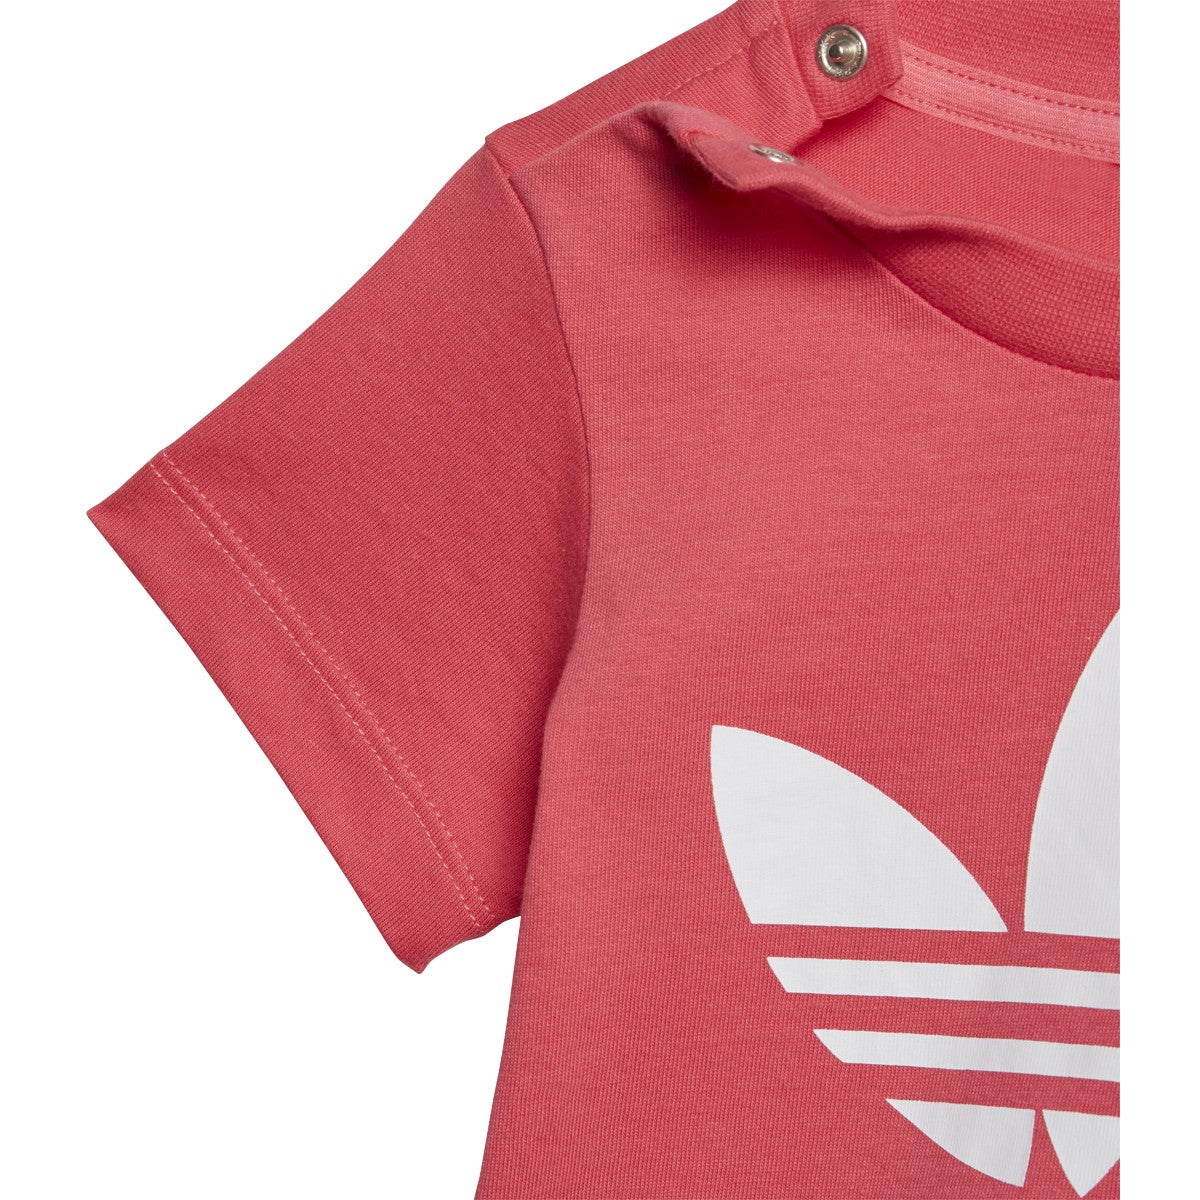 Adidas Trefoil Infants Tee Real Pink-White